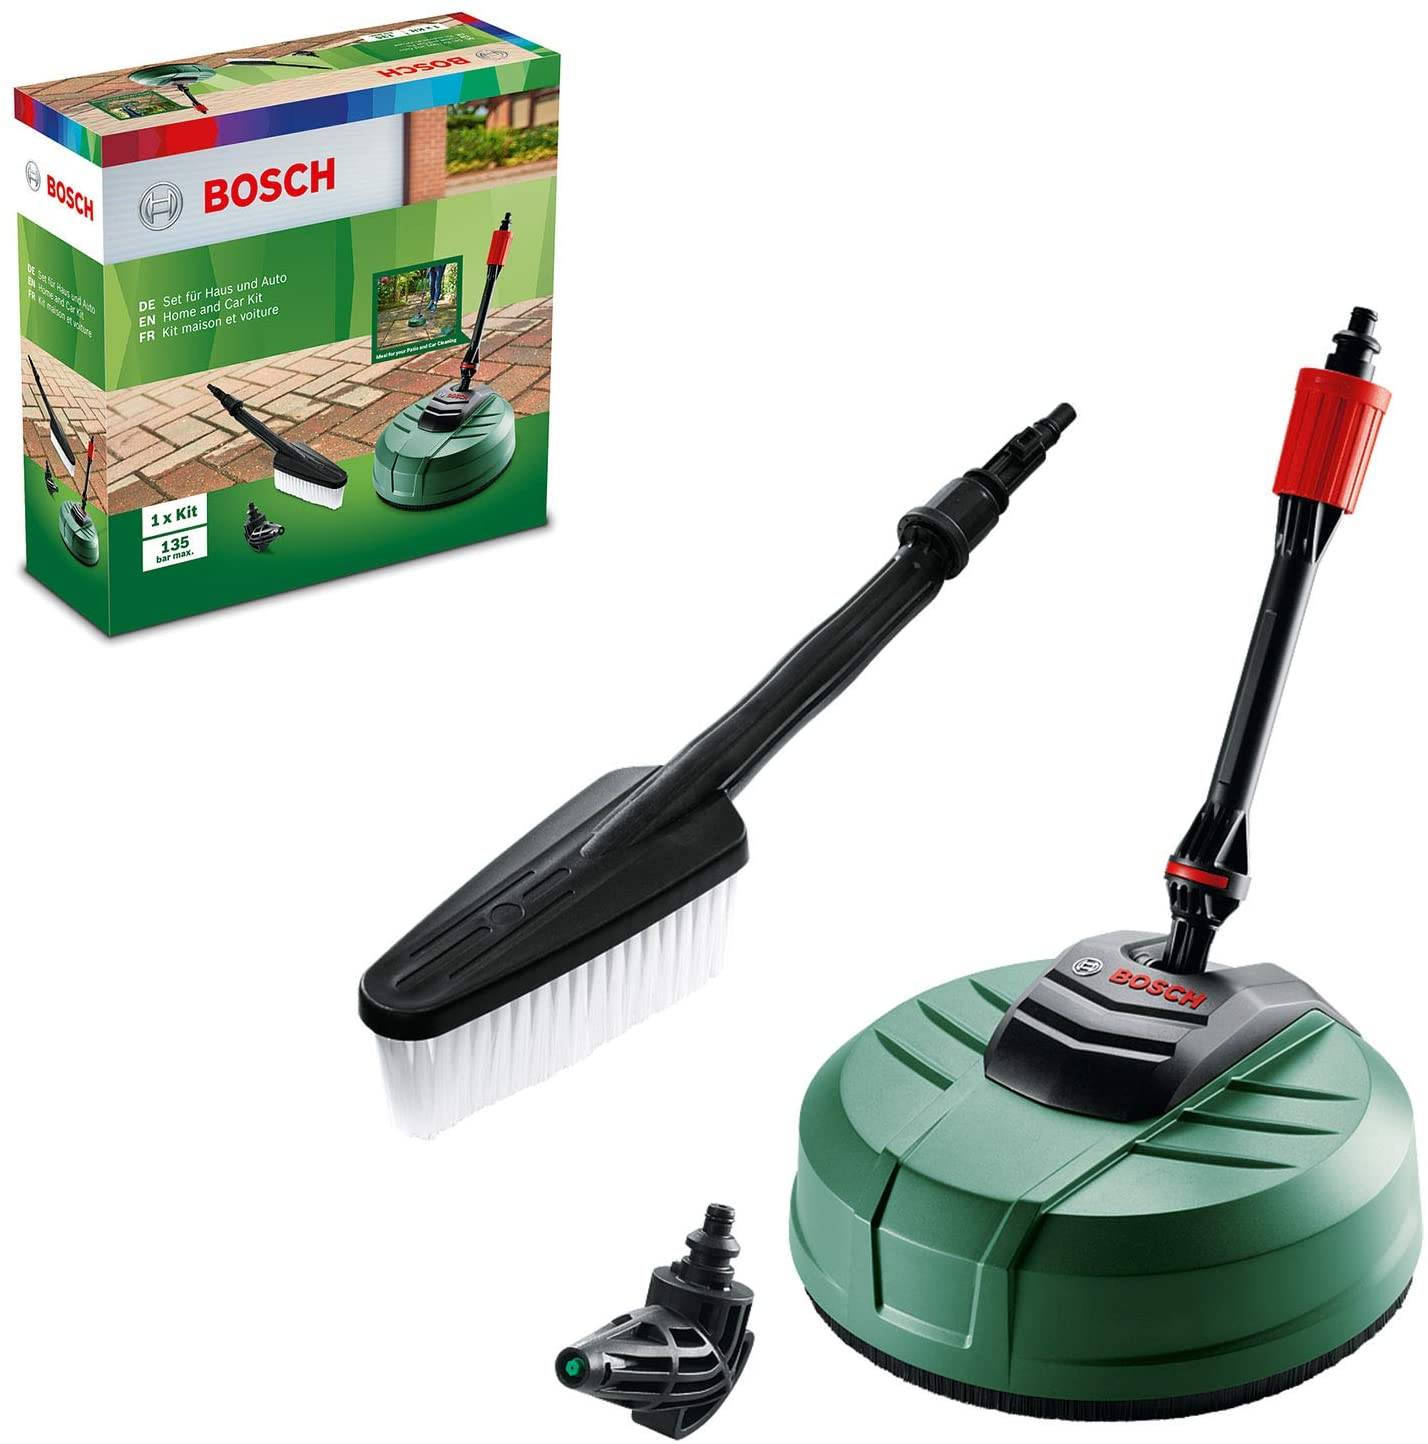 Bosch F016800611 Pressure Washer Home and Car Cleaning Kit (with patio Cleaner, wash Brush and 90 degree nozzle, in Carton Packaging)